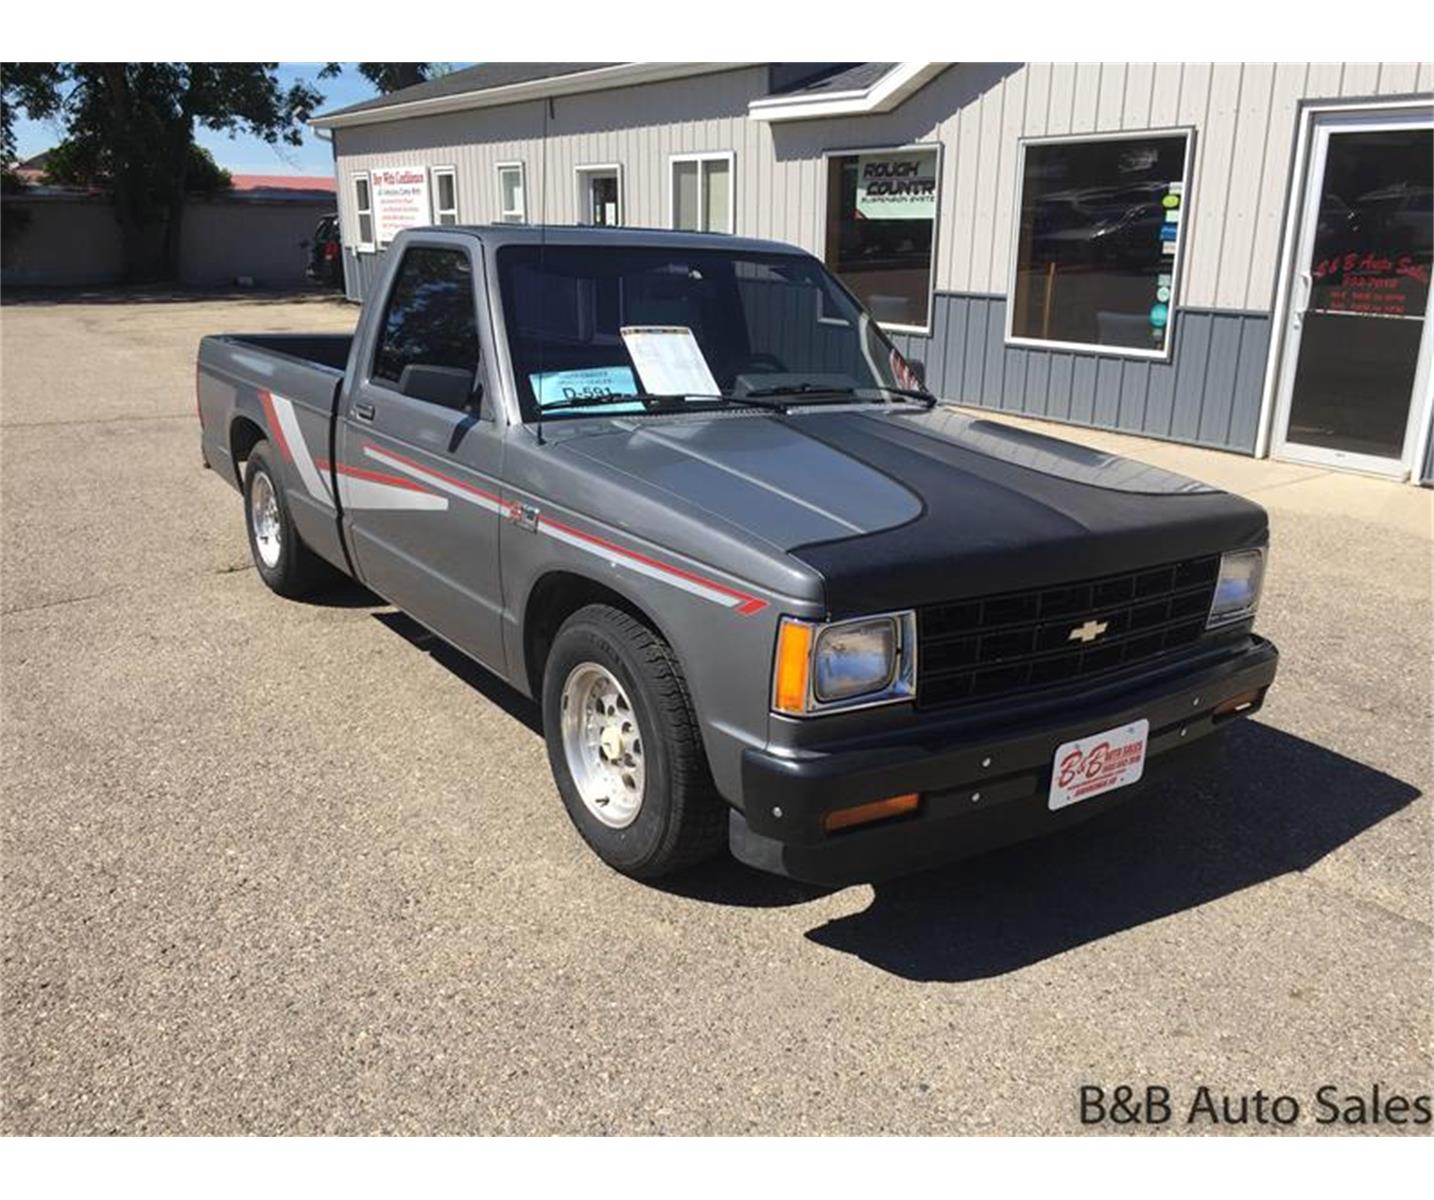 Classic Chevrolet S10 for Sale on ClassicCars.com